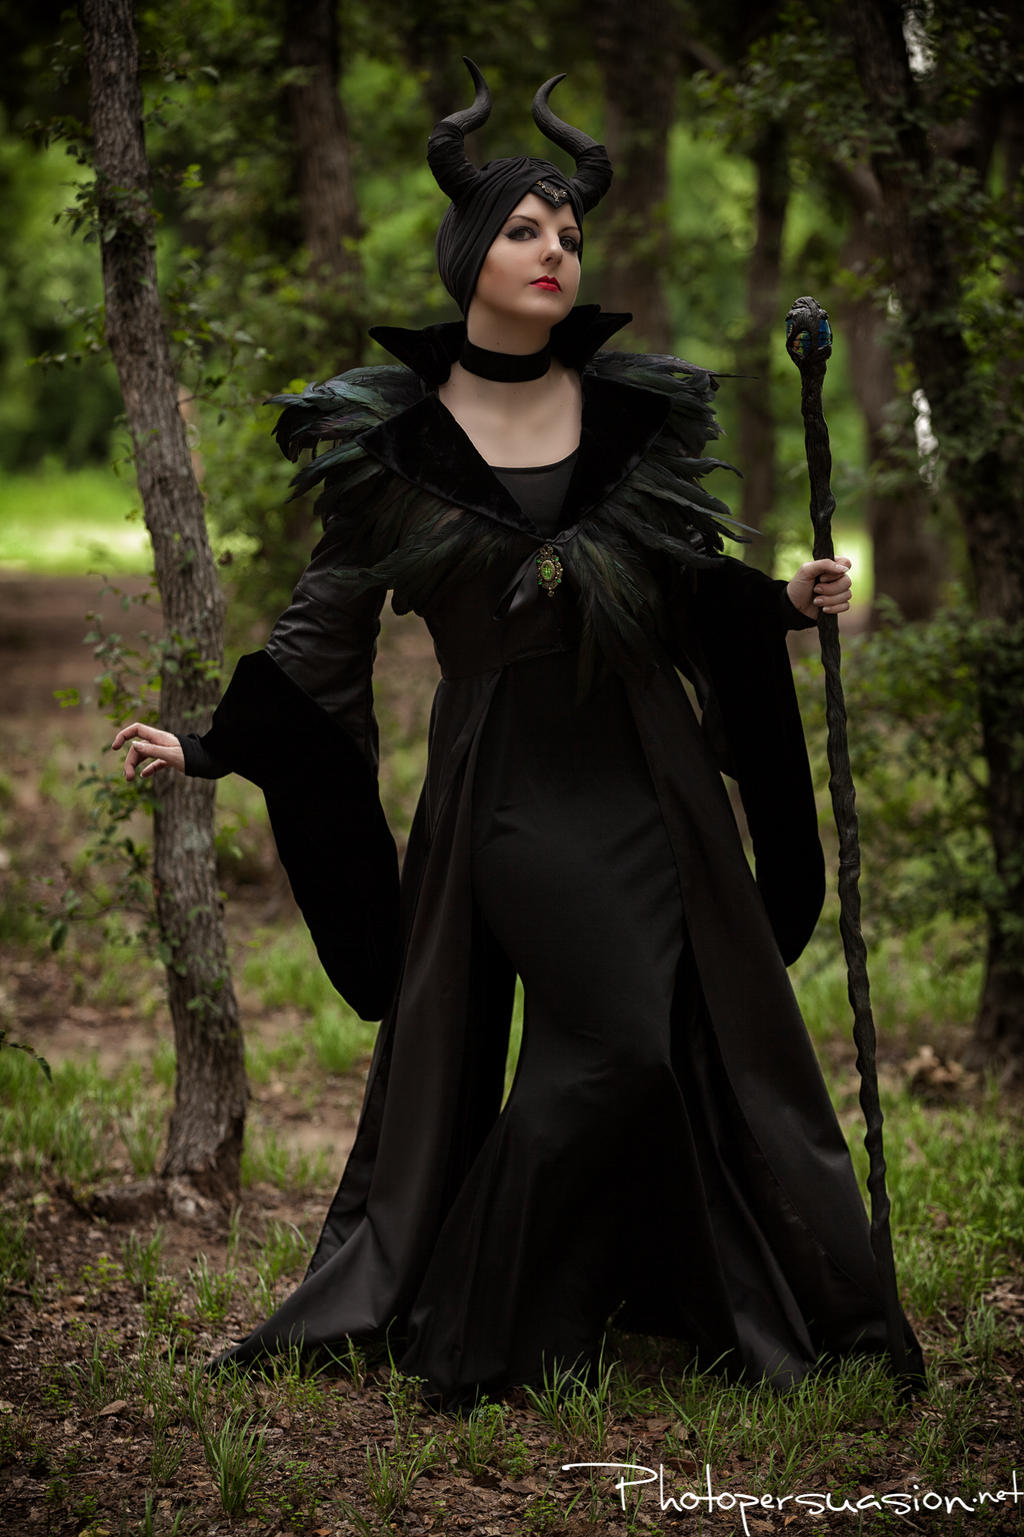 Maleficent Cosplay by Photopersuasion on DeviantArt